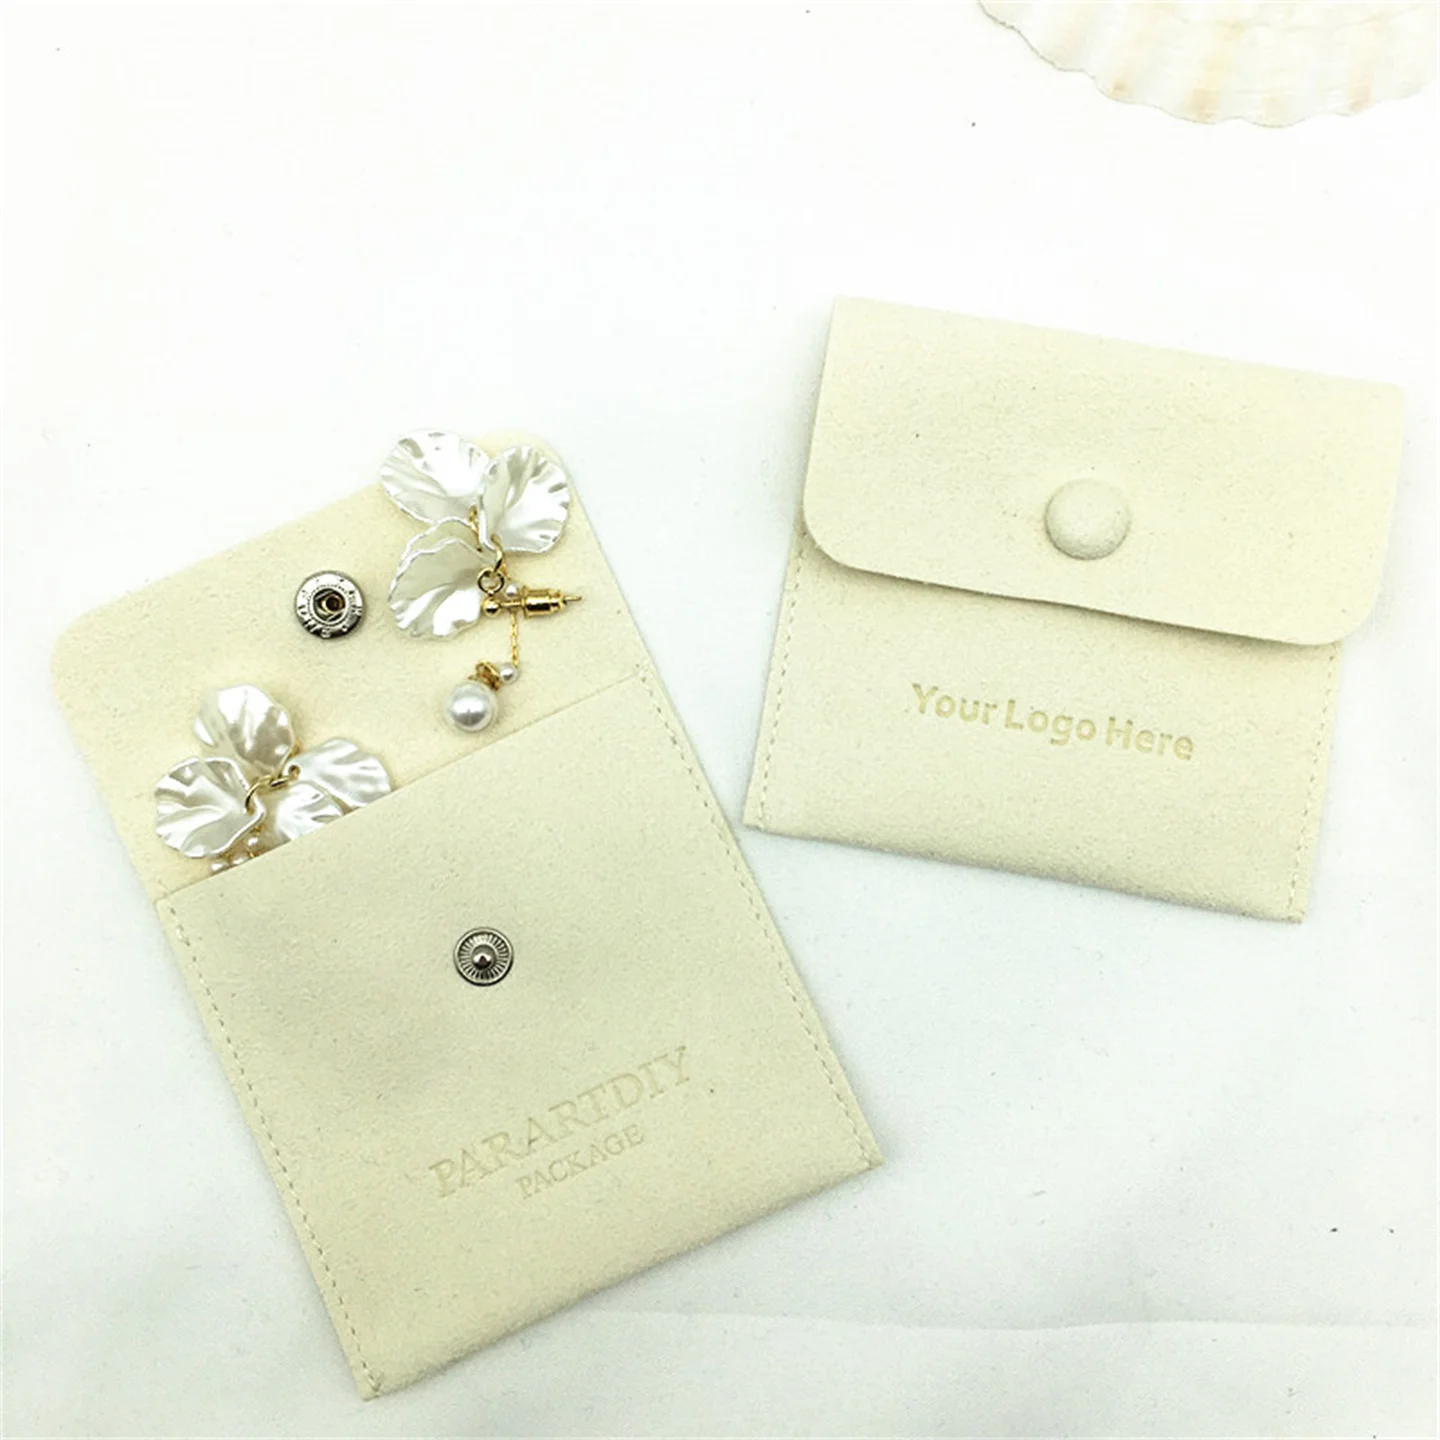 50 white beige snap bags can be personalized logo printing custom size earring packaging bag necklace ring gift bag factory price 200pcs lot sublimation blank metal key chain key ring for sublimation ink transfer printing diy gifts